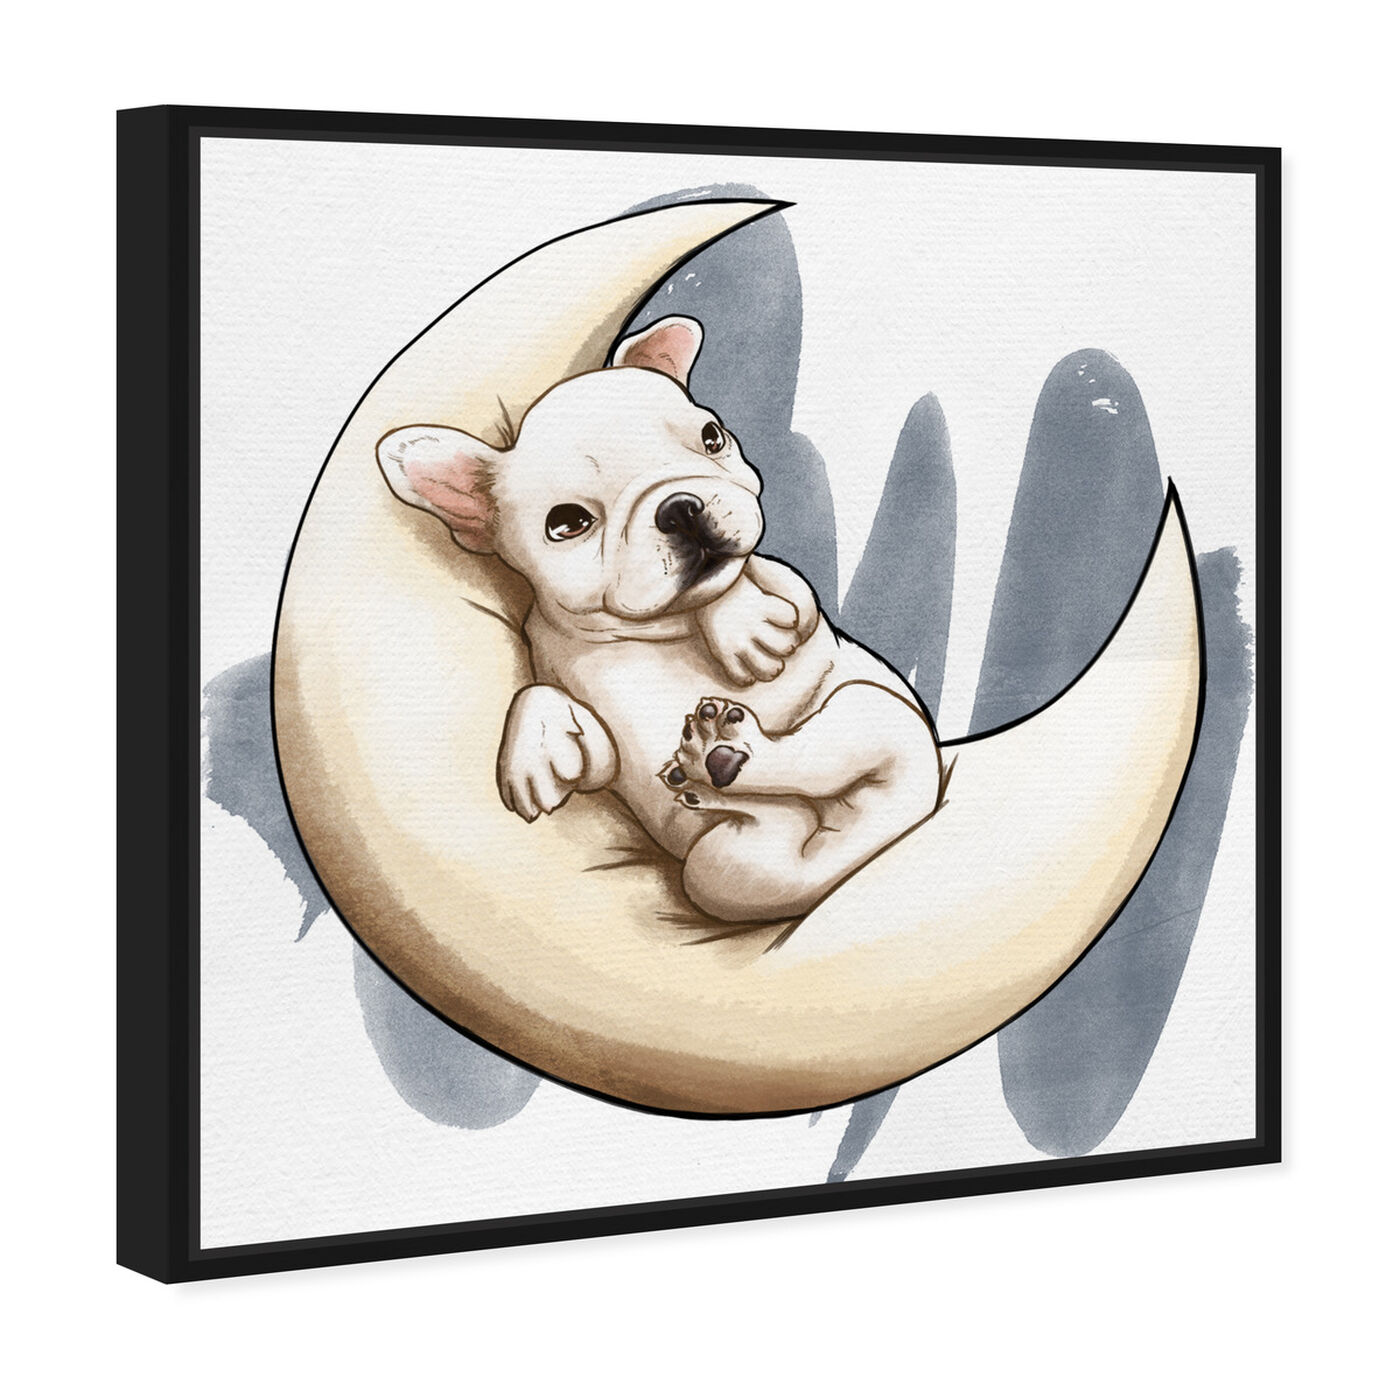 Angled view of Lunar Frenchie featuring animals and dogs and puppies art.